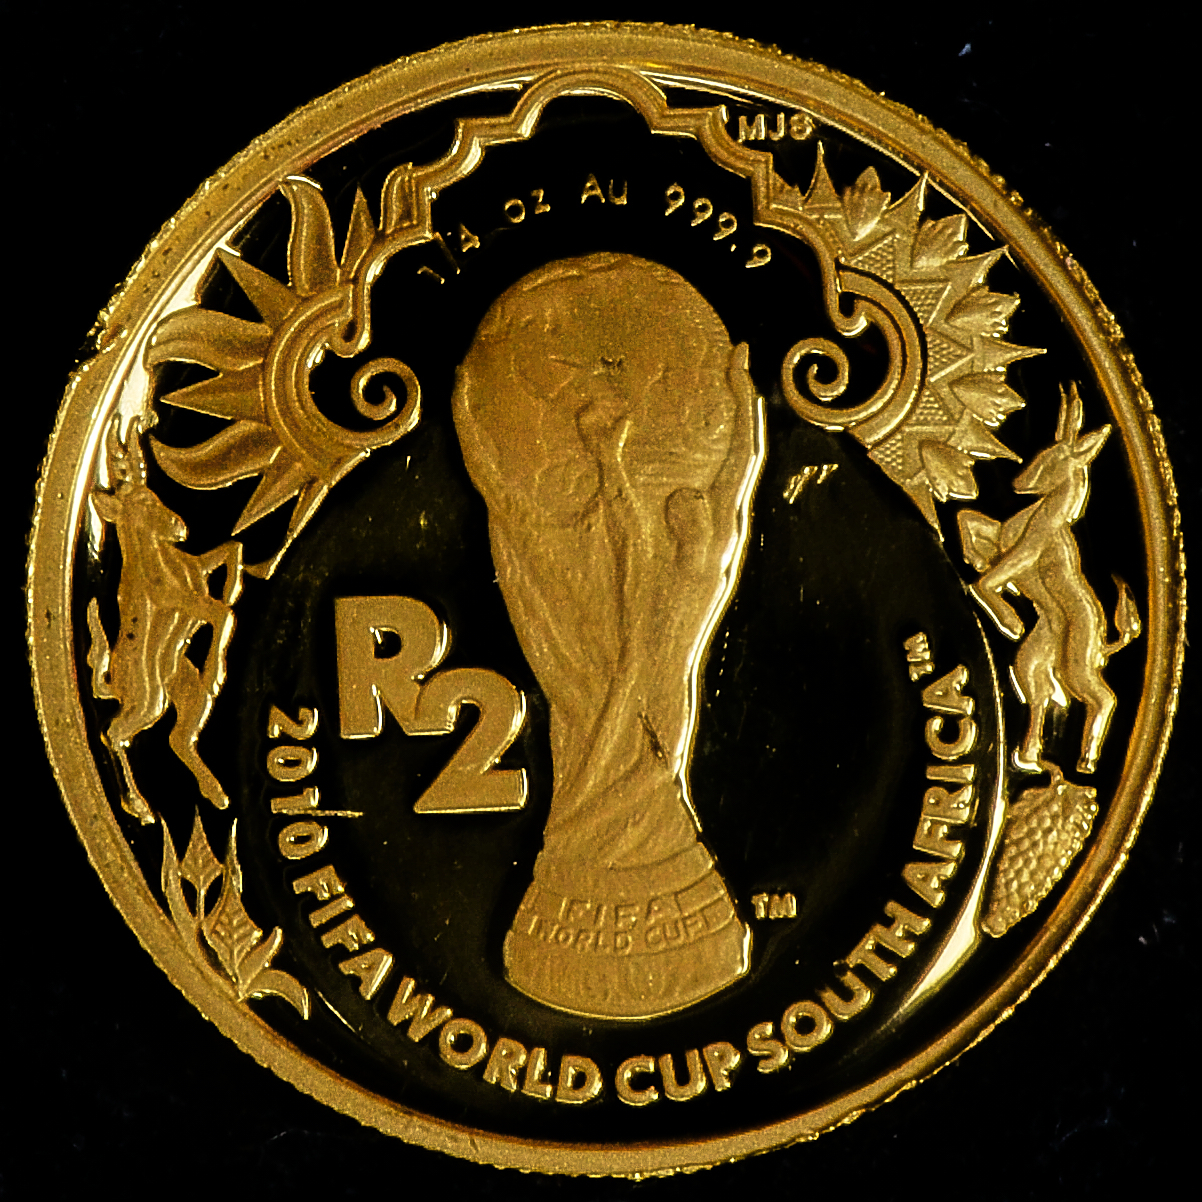 South Africa - 2 rand - 2010 - FIFA World Cup - 1/4oz